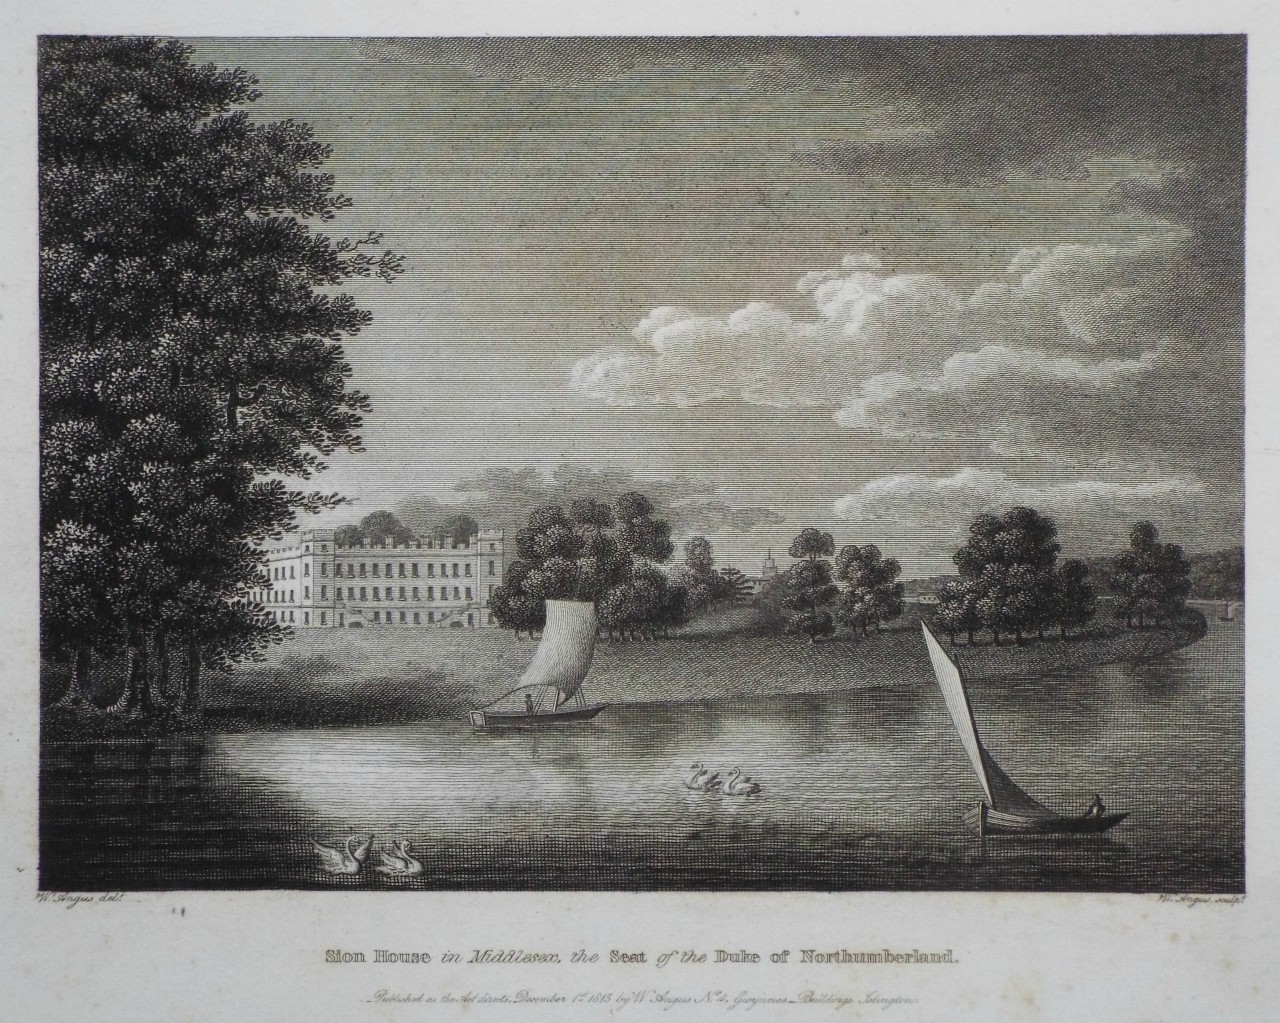 Print - Sion House in Middlesex, the Seat of the Duke of Northumberland. - Angus